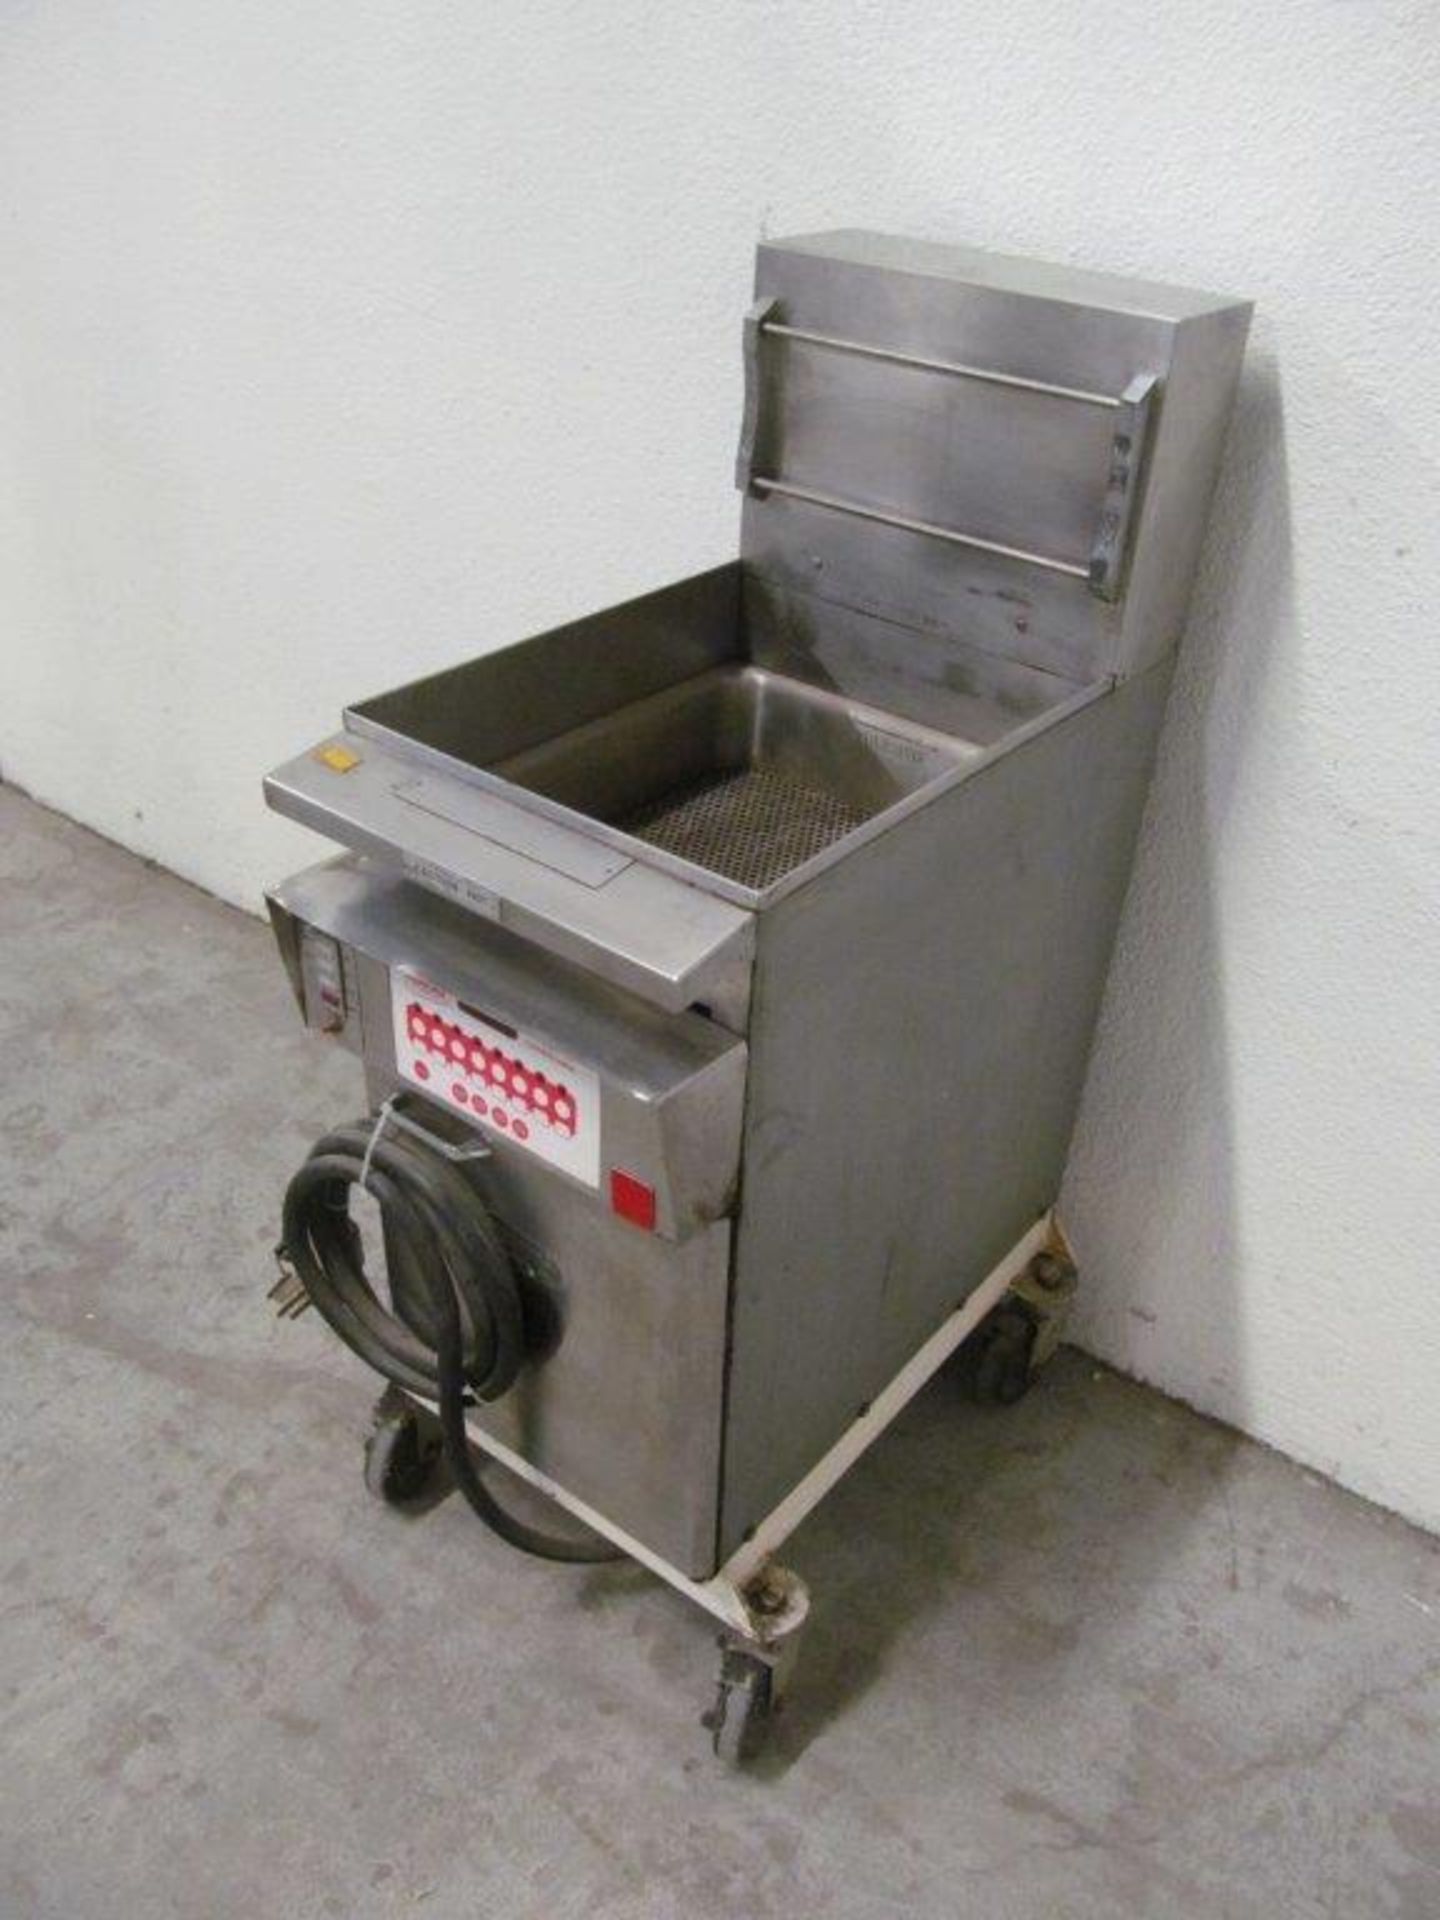 KEATING ELECTRIC STAINLESS STEEL FRYER - Image 3 of 3